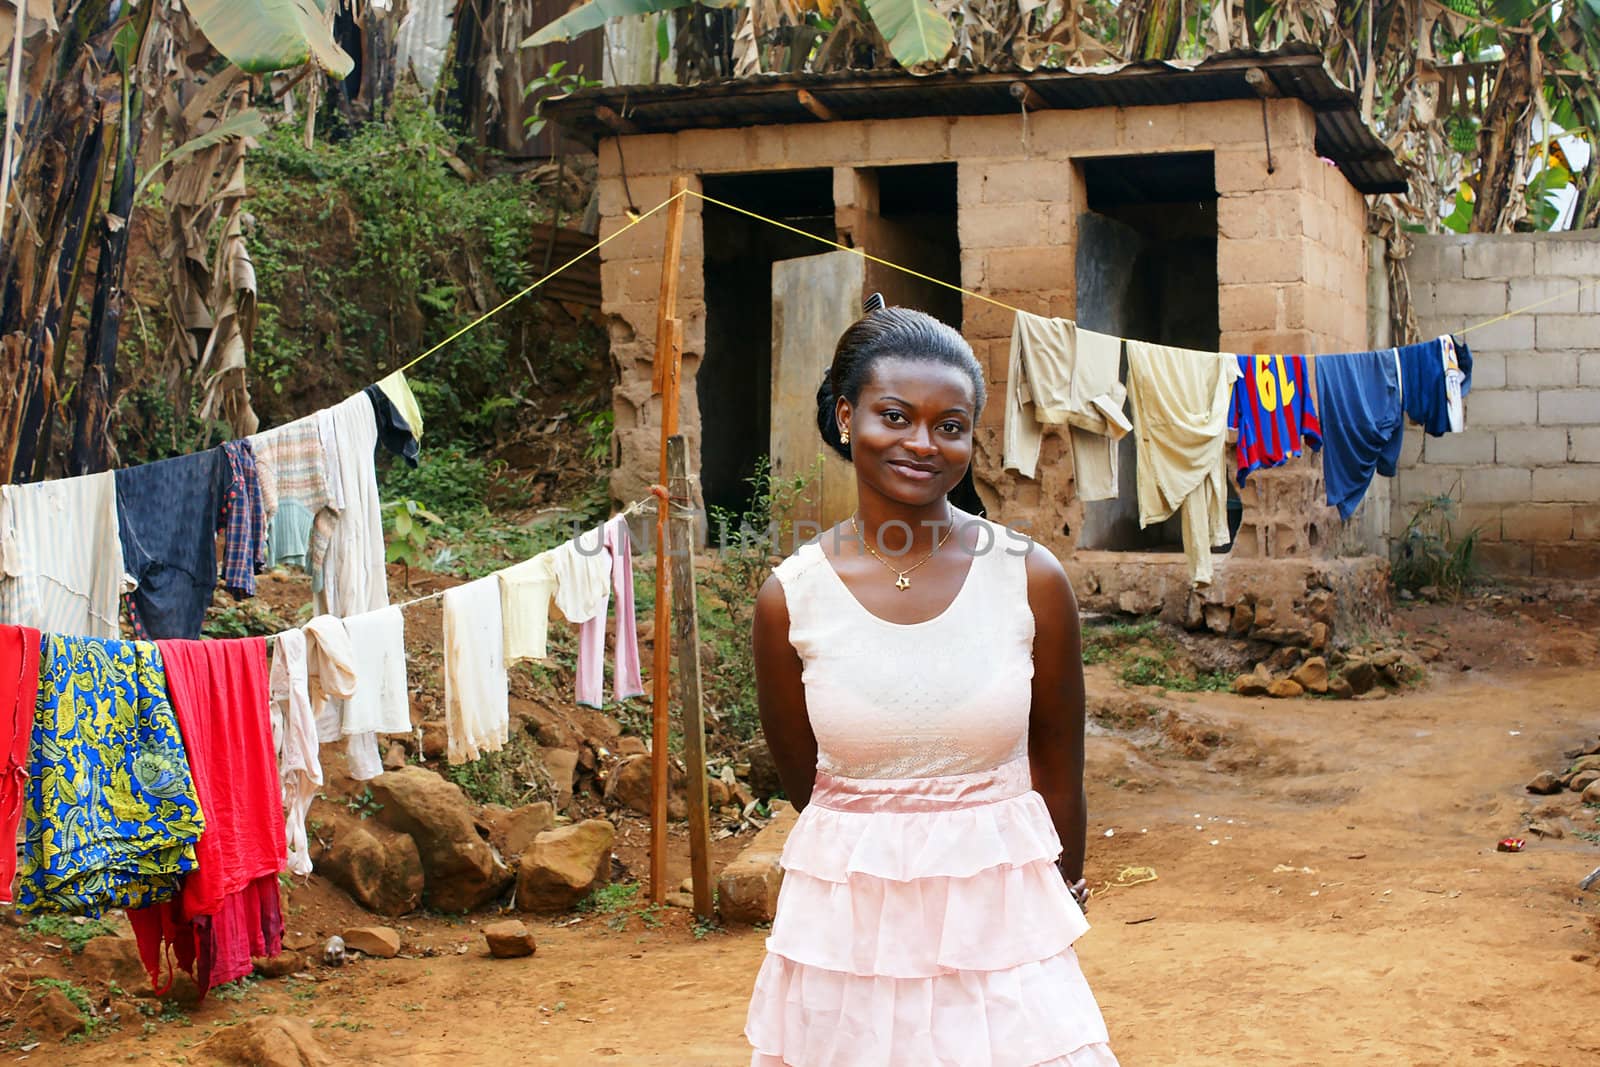 Beautiful young African woman in backyard with clothesline